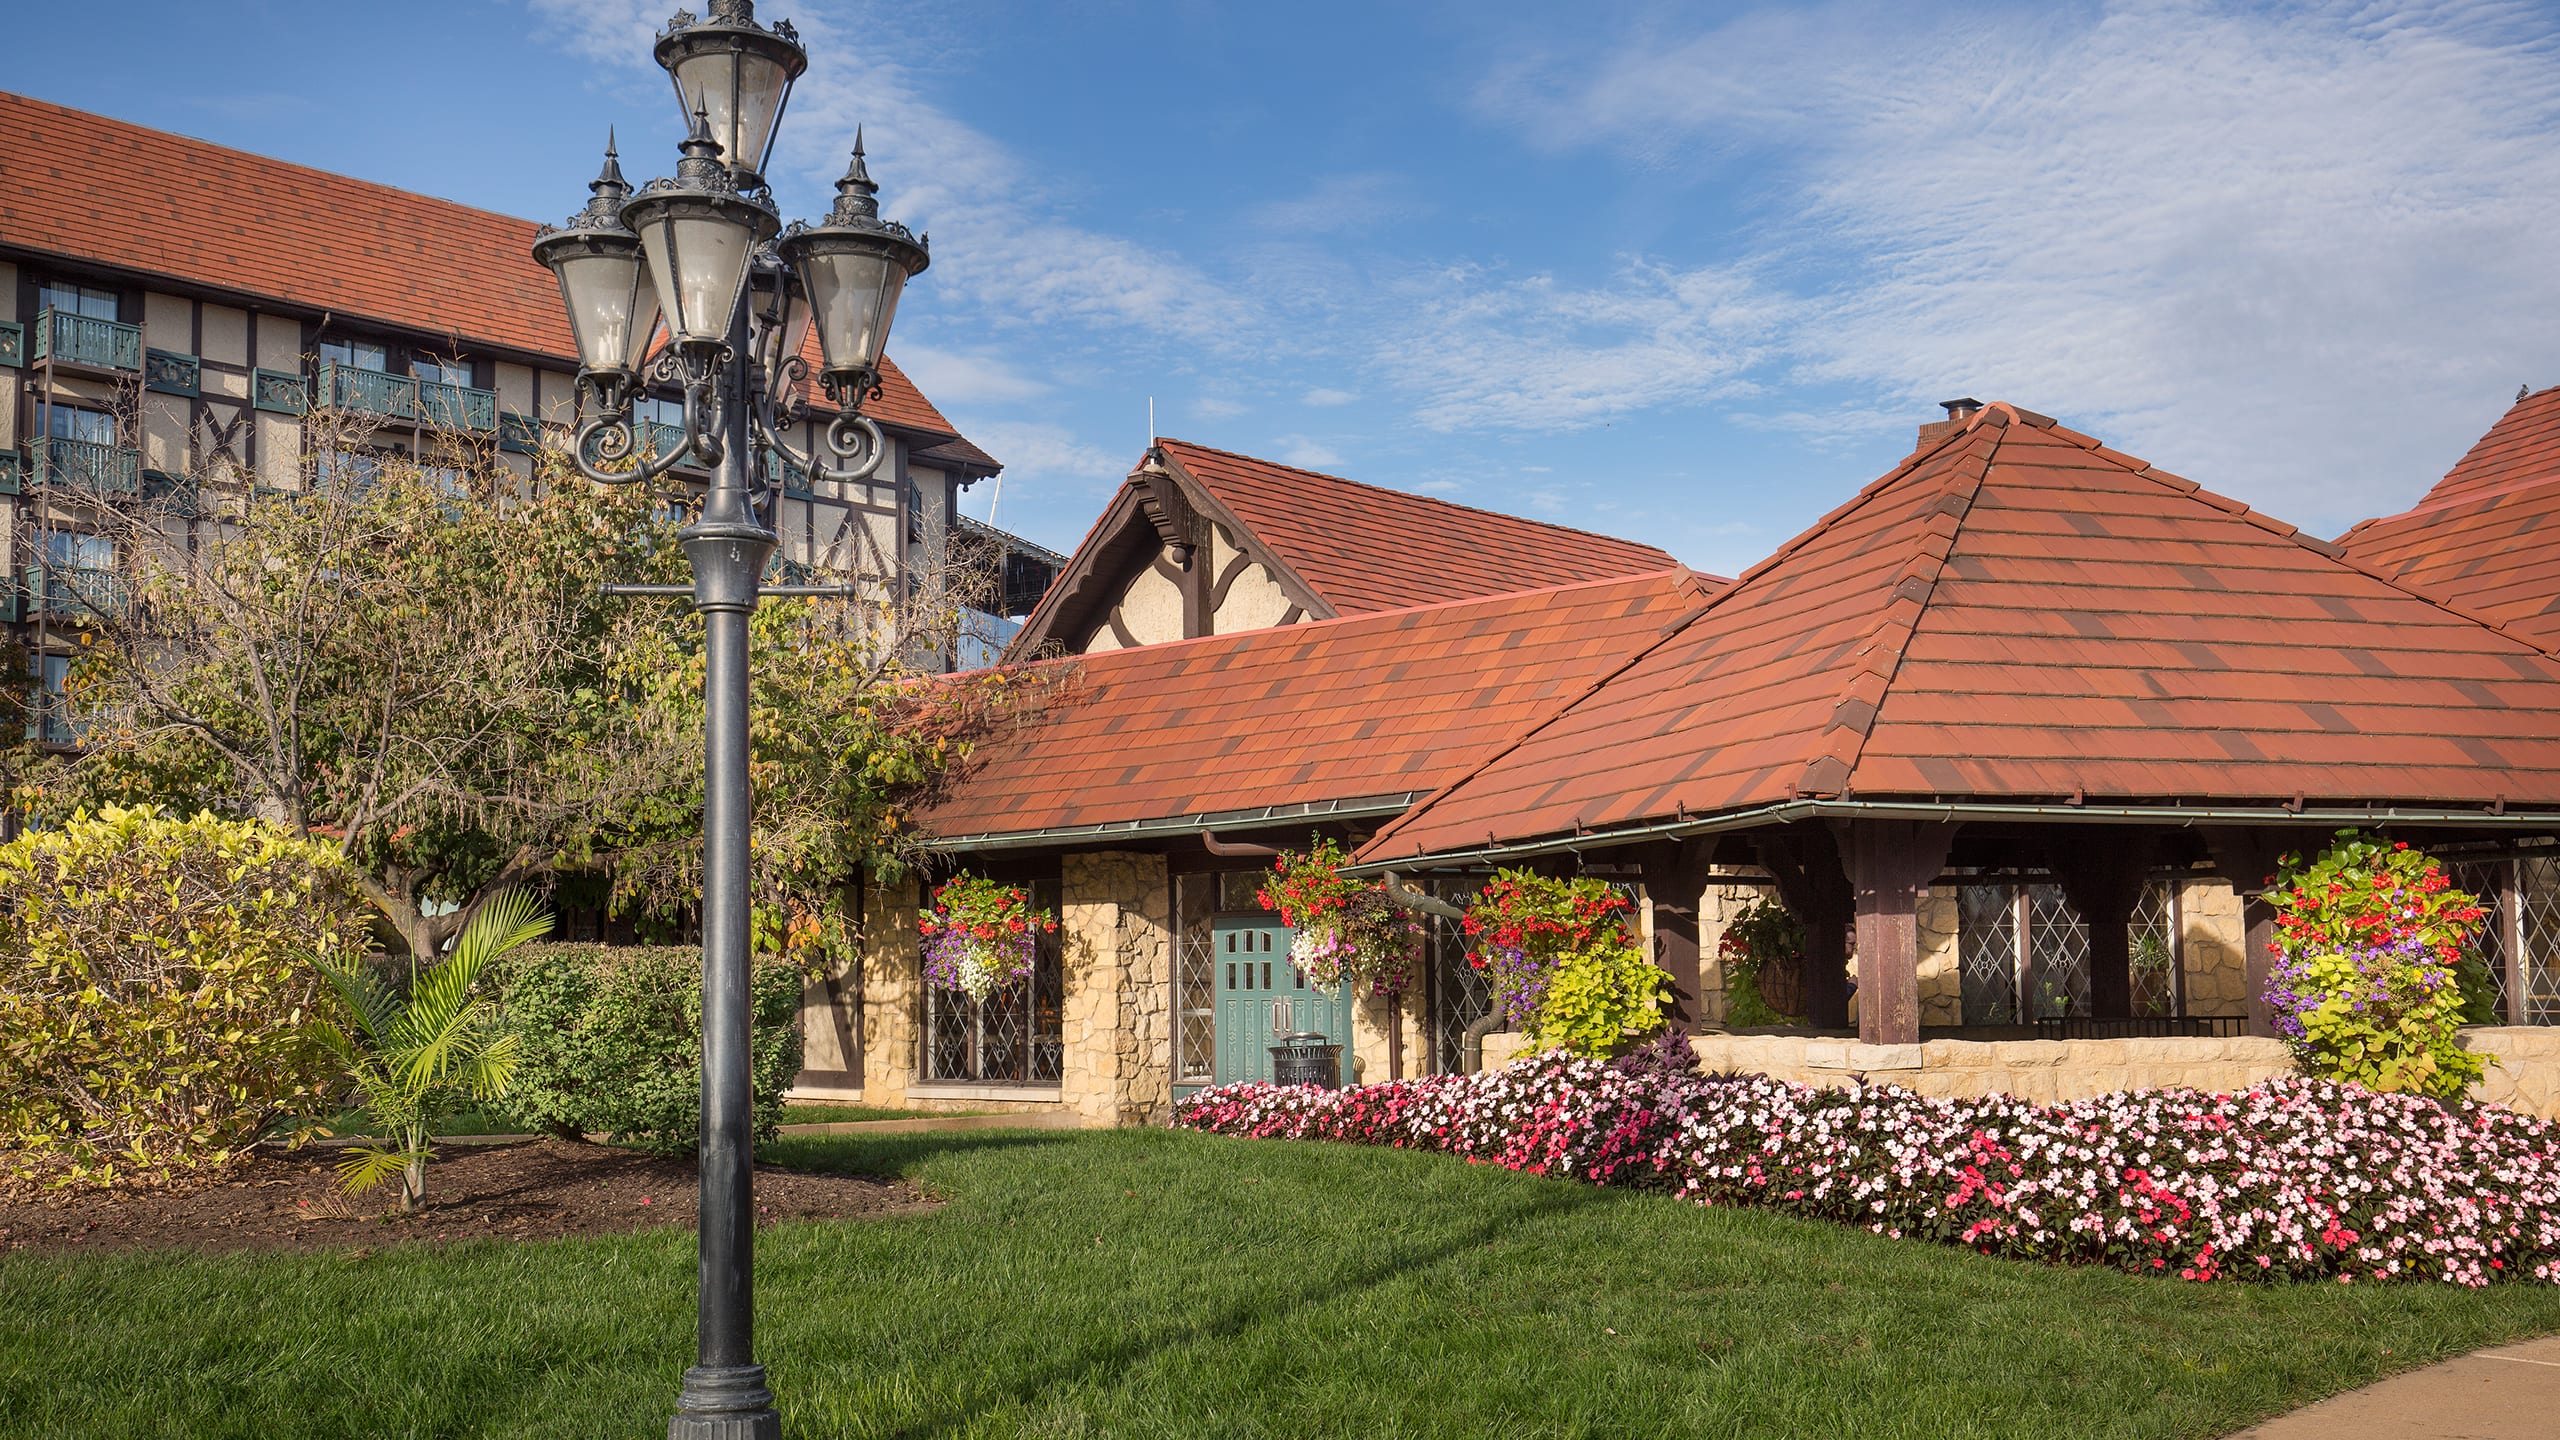 Sheraton Westport Chalet Hotel Featuring Ludowici Lanai Clay Roof Tile